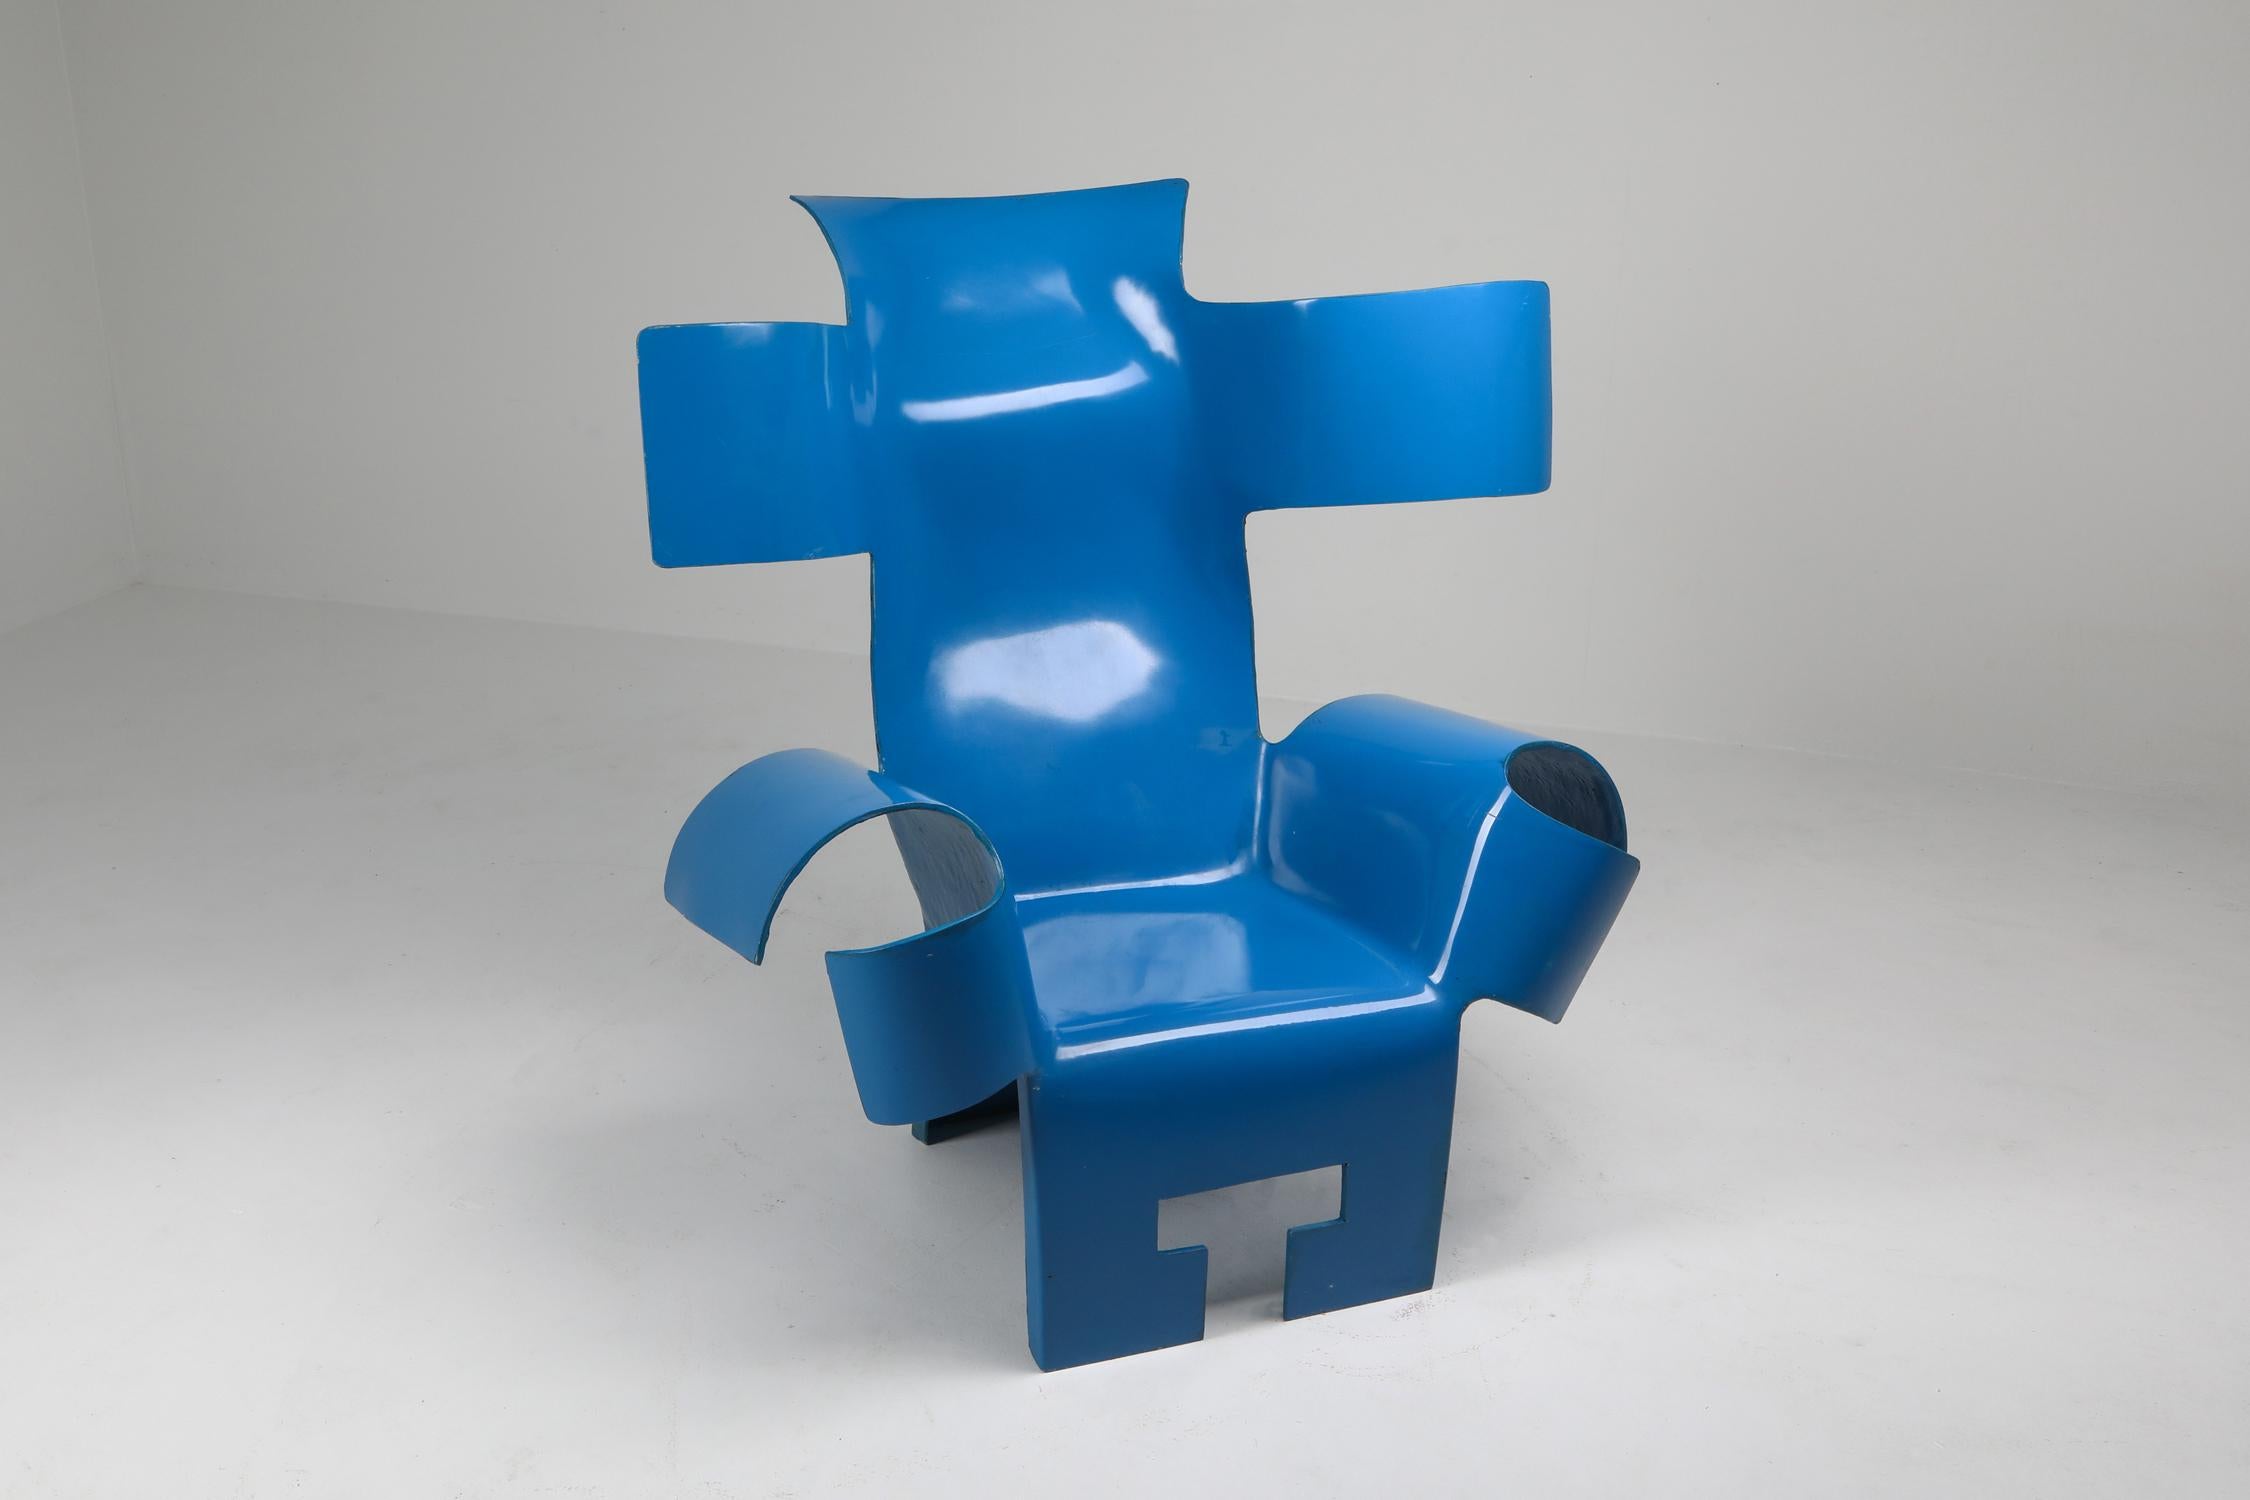 Collectible design, functional art piece, Italy 1980s

free from sculpture throne chair in blue resin and fiberglass 

attributed to Gaetano Pesce.